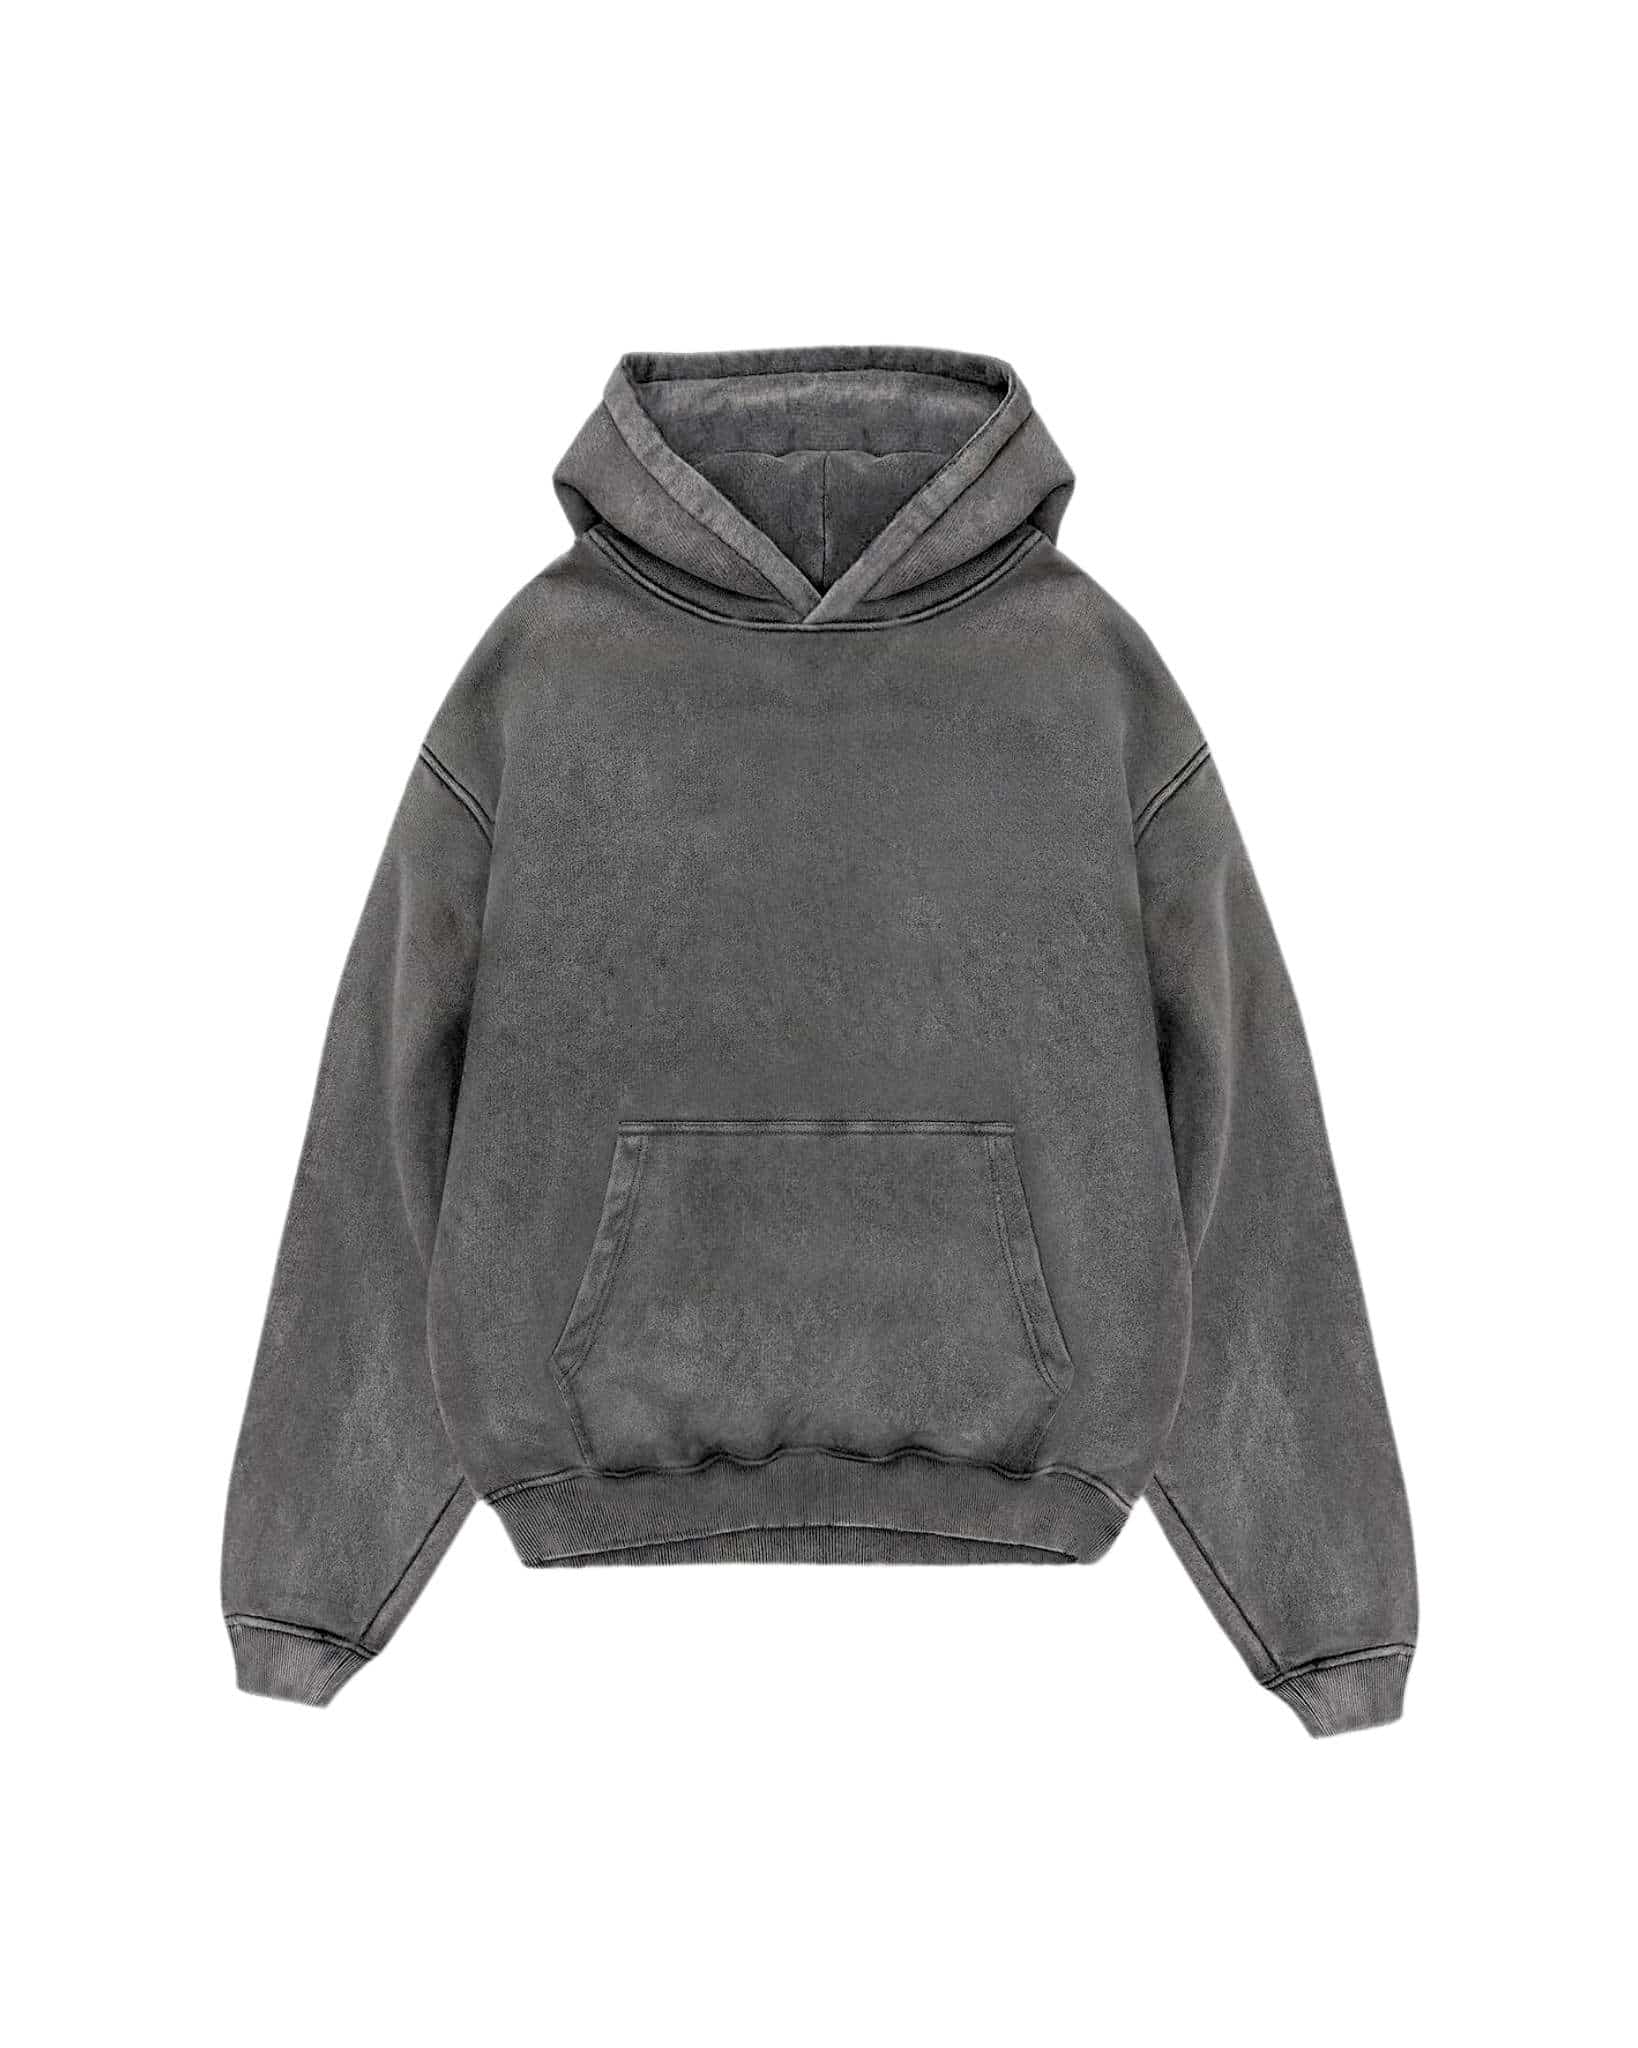 Hoodie Oversize FadeOut (Acid Wash) - Create Fashion Brand - Clothing  Manufacturers